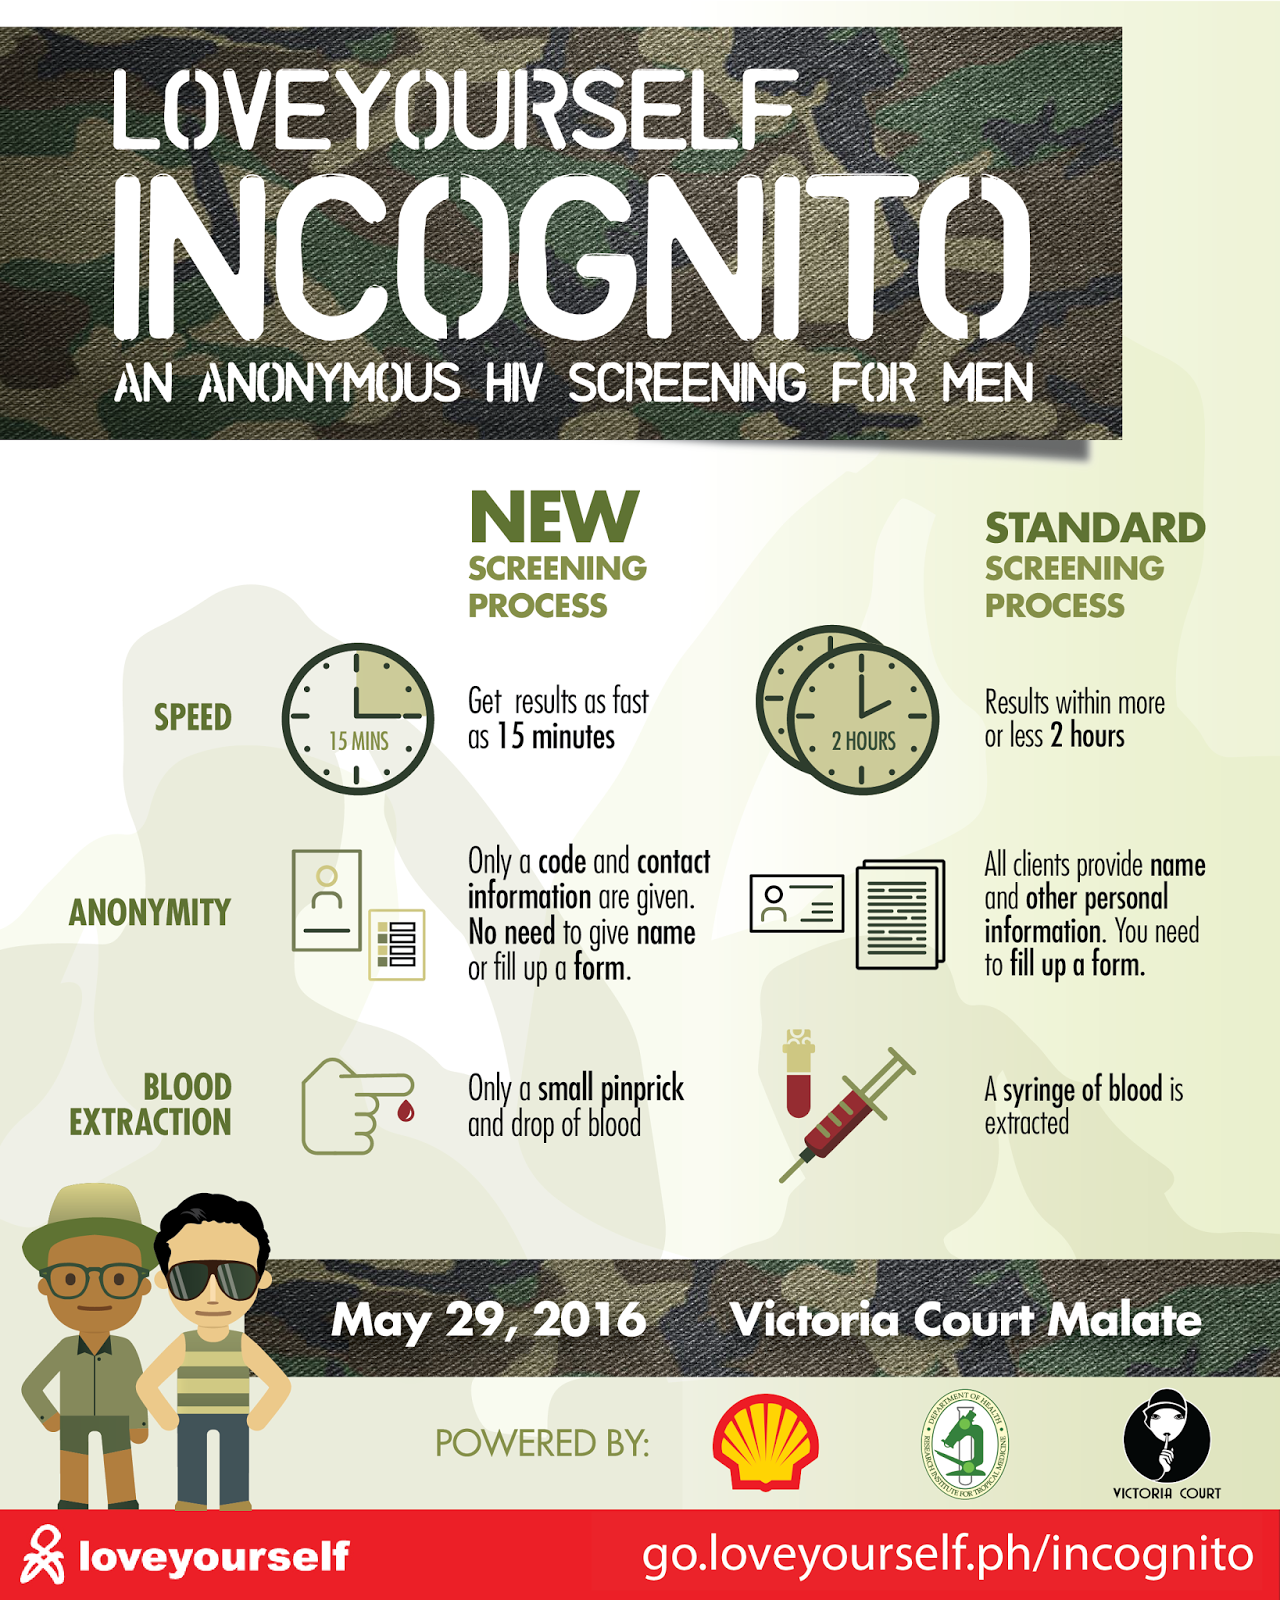 LoveYourself Incognito is also in response to the alarming rise of HIV infections in which the Department of Health reported 736 new cases in March 2016